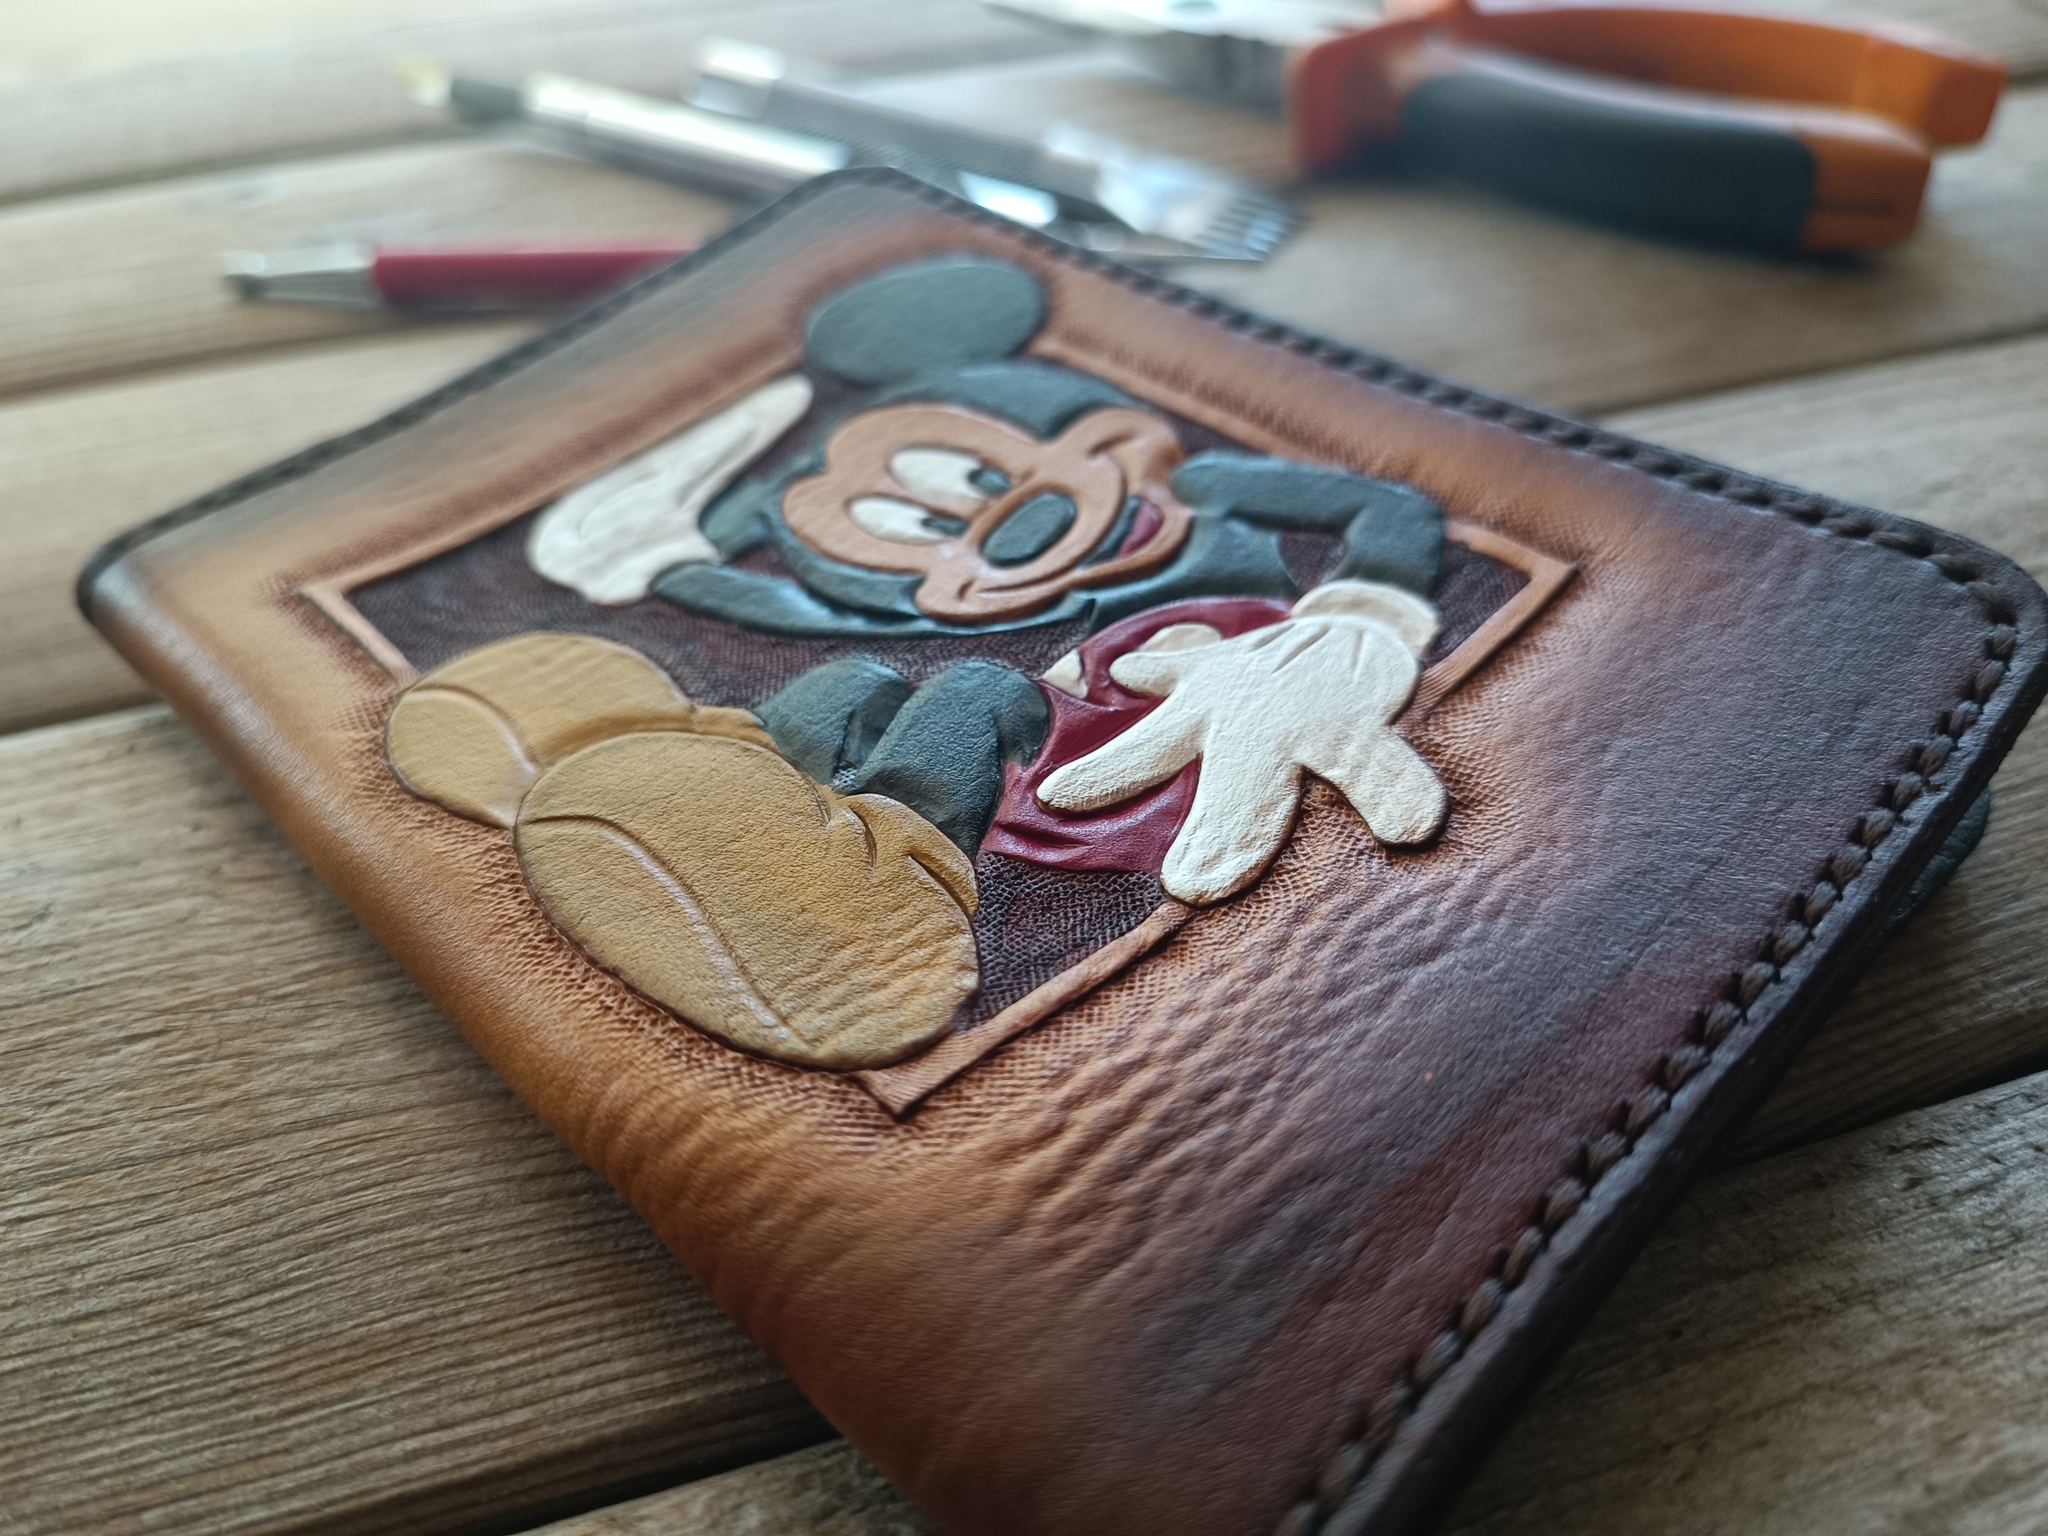 Waha, Valera and all all all - My, Mat, Handmade, Warhammer 40k, Mickey Mouse, Fox, Cover, Leather products, Embossing on leather, Fallout, Natural leather, Longpost